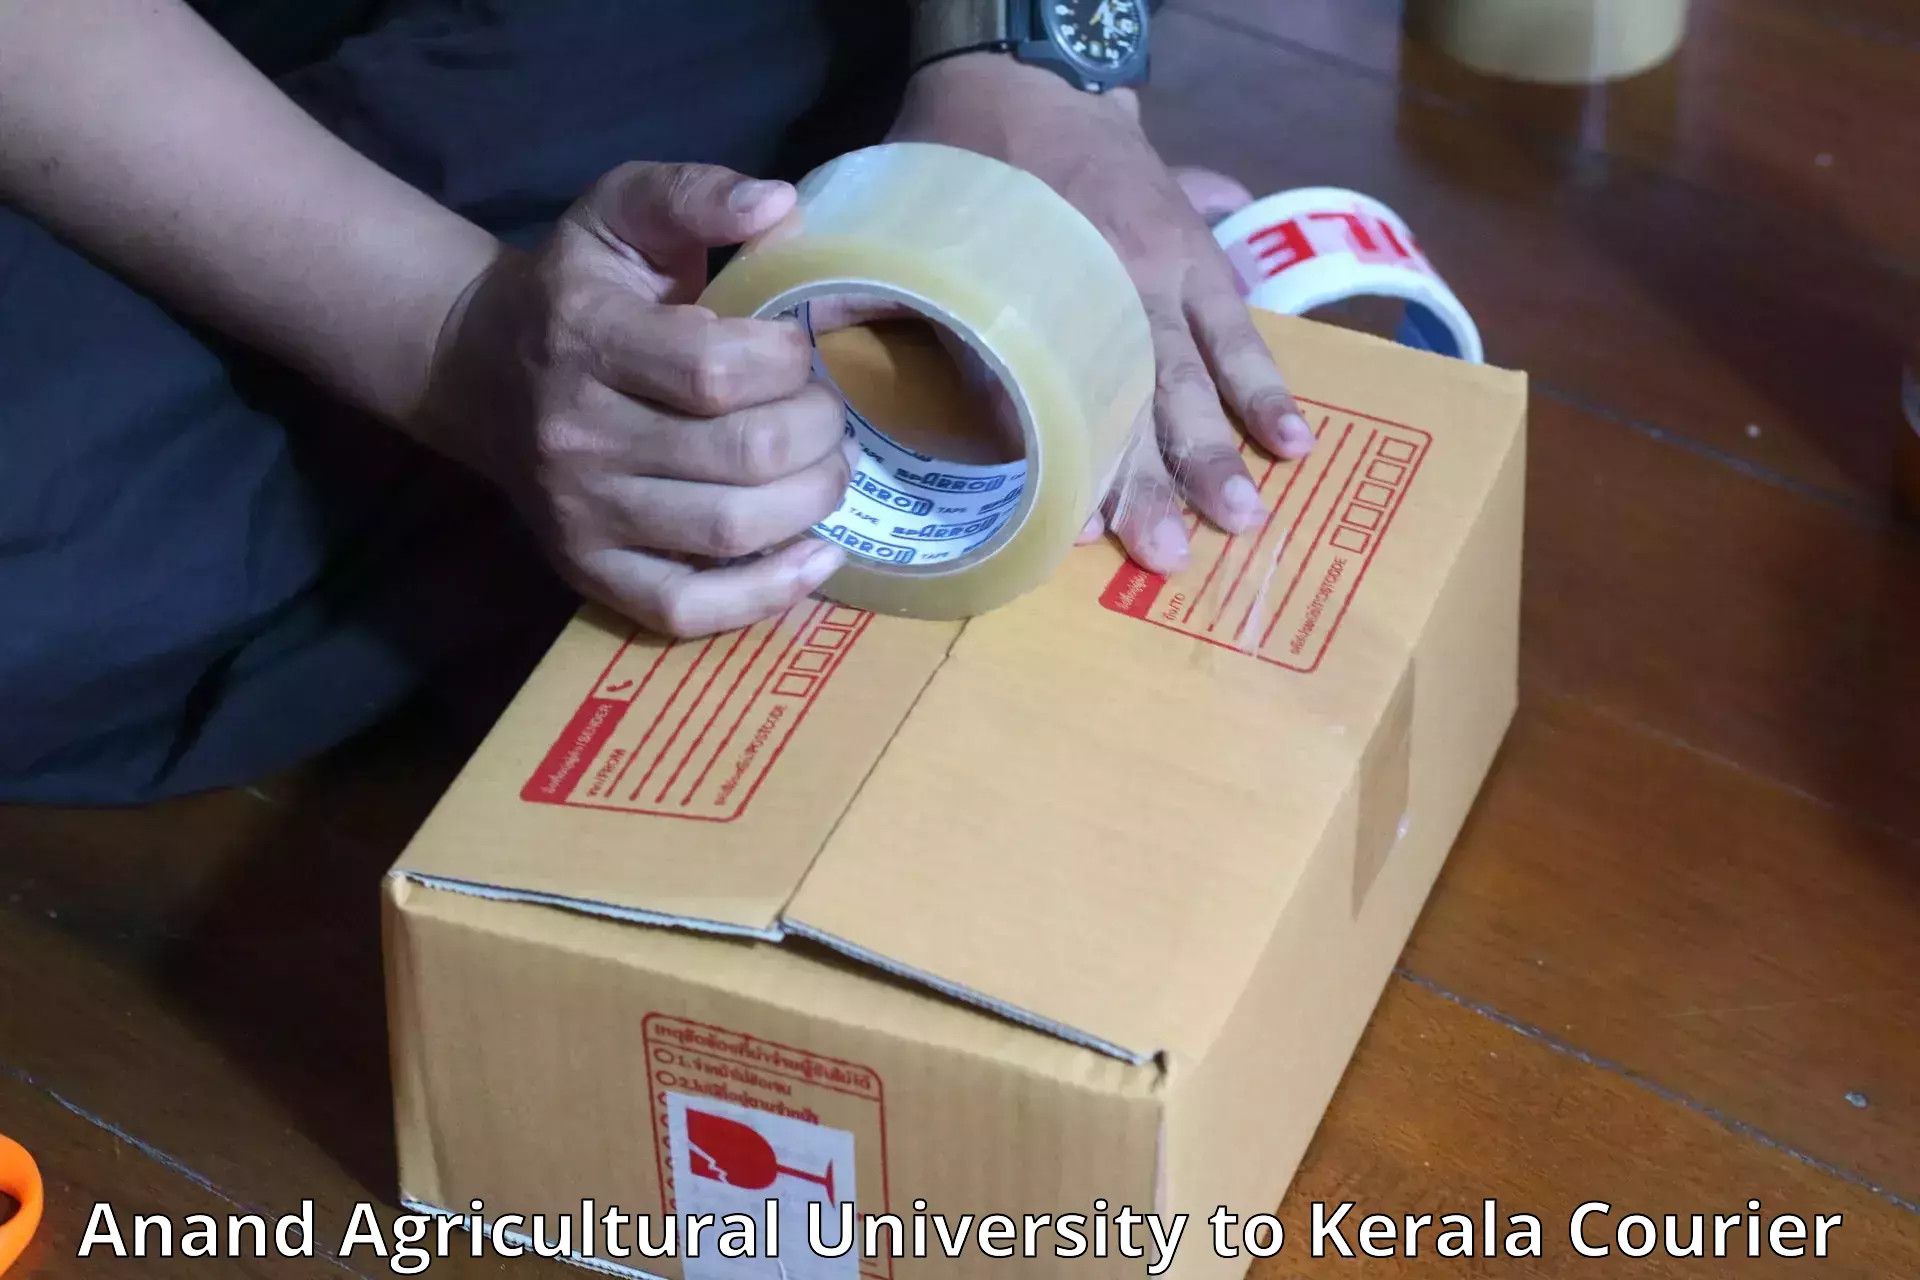 Baggage shipping service Anand Agricultural University to Rajamudy